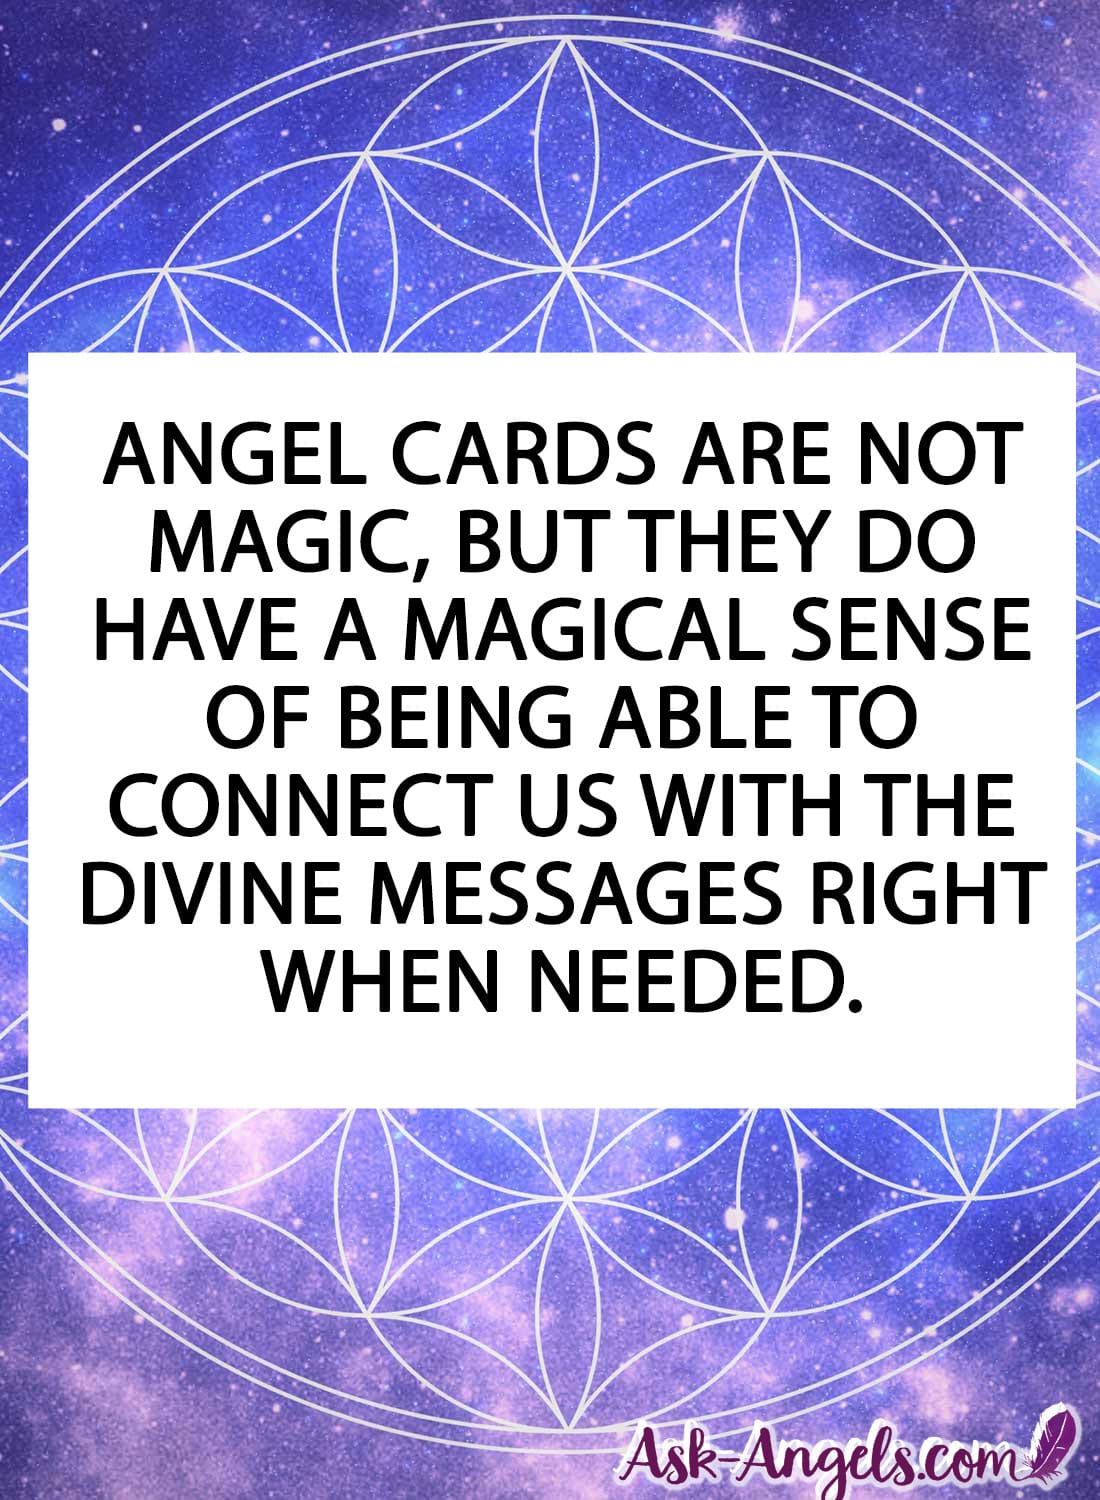 Angel Cards are not magic, but they do have a magical sense of being able to connect us with the Divine messages right when needed.